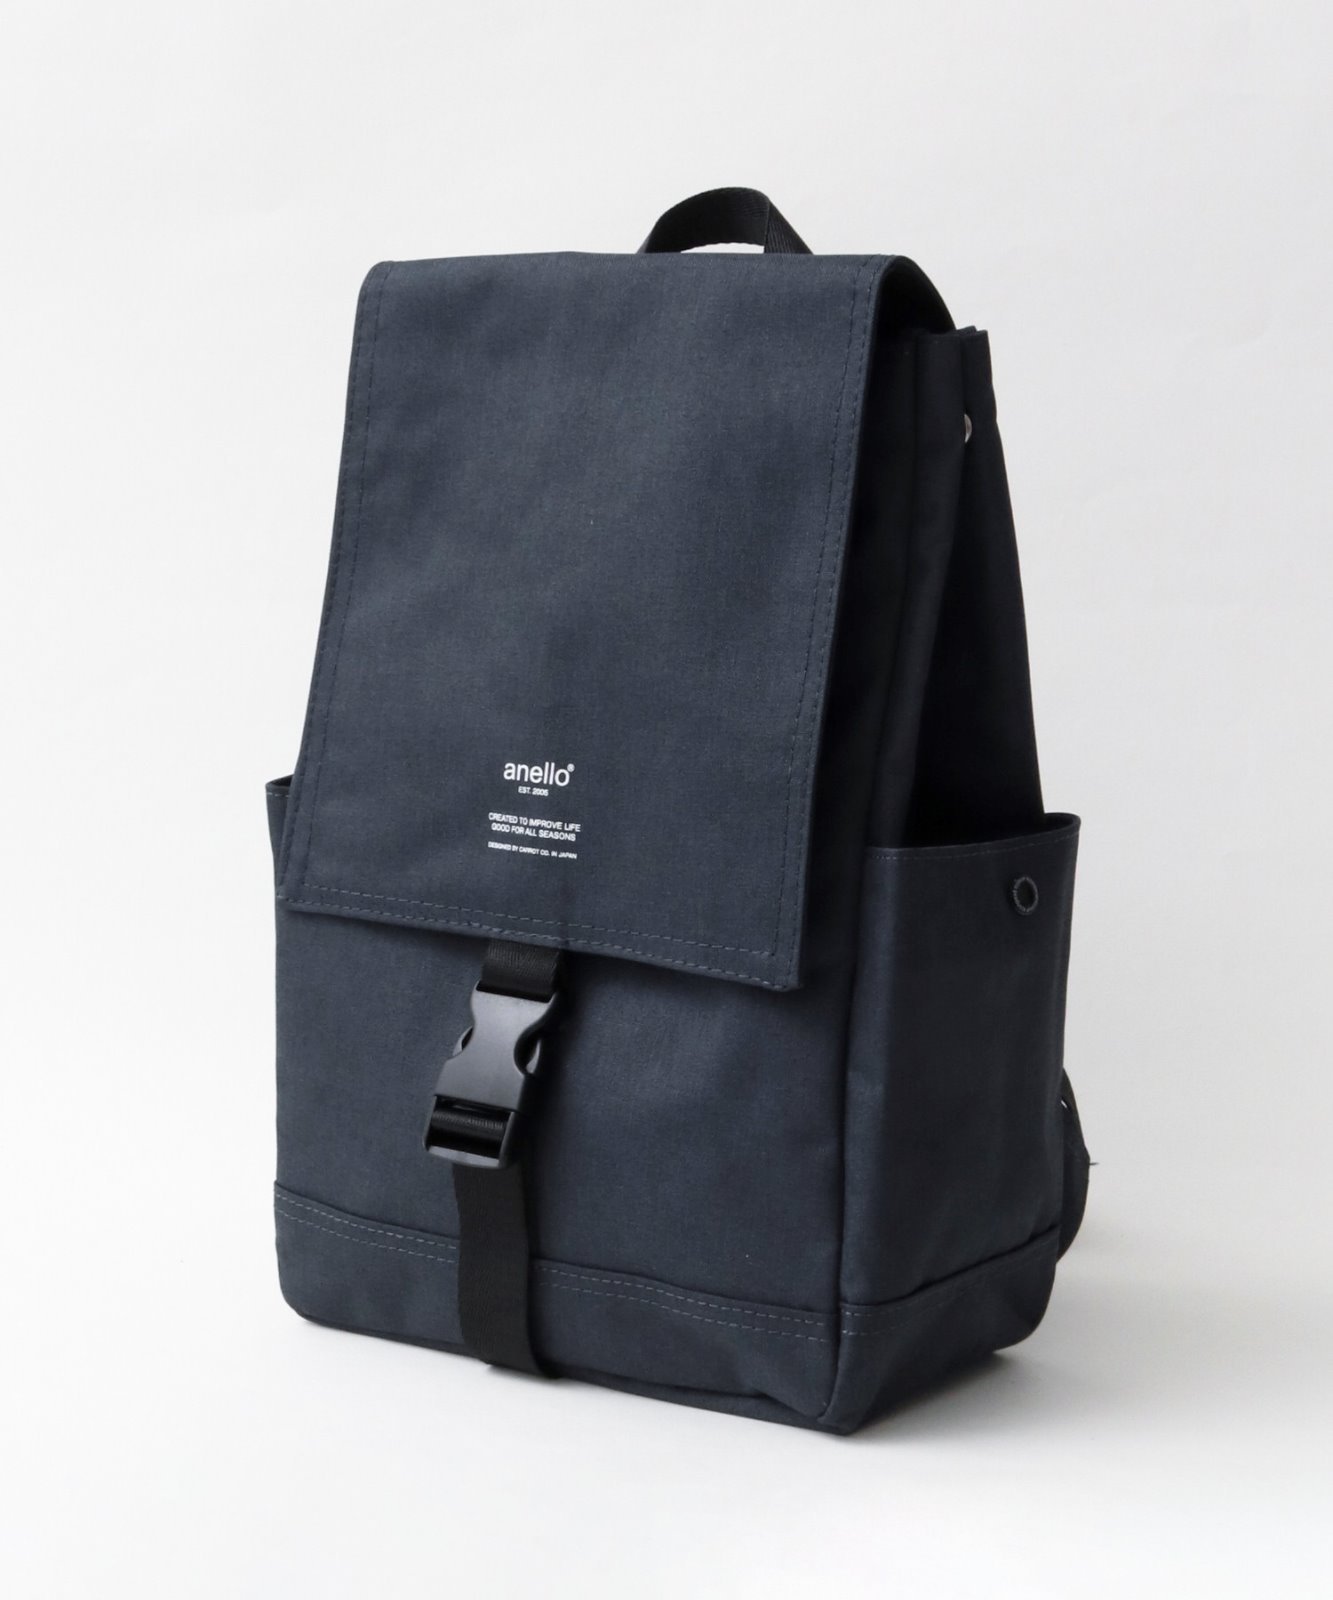 Japan famous brand Anello backpack product # 9-2466279-18-9